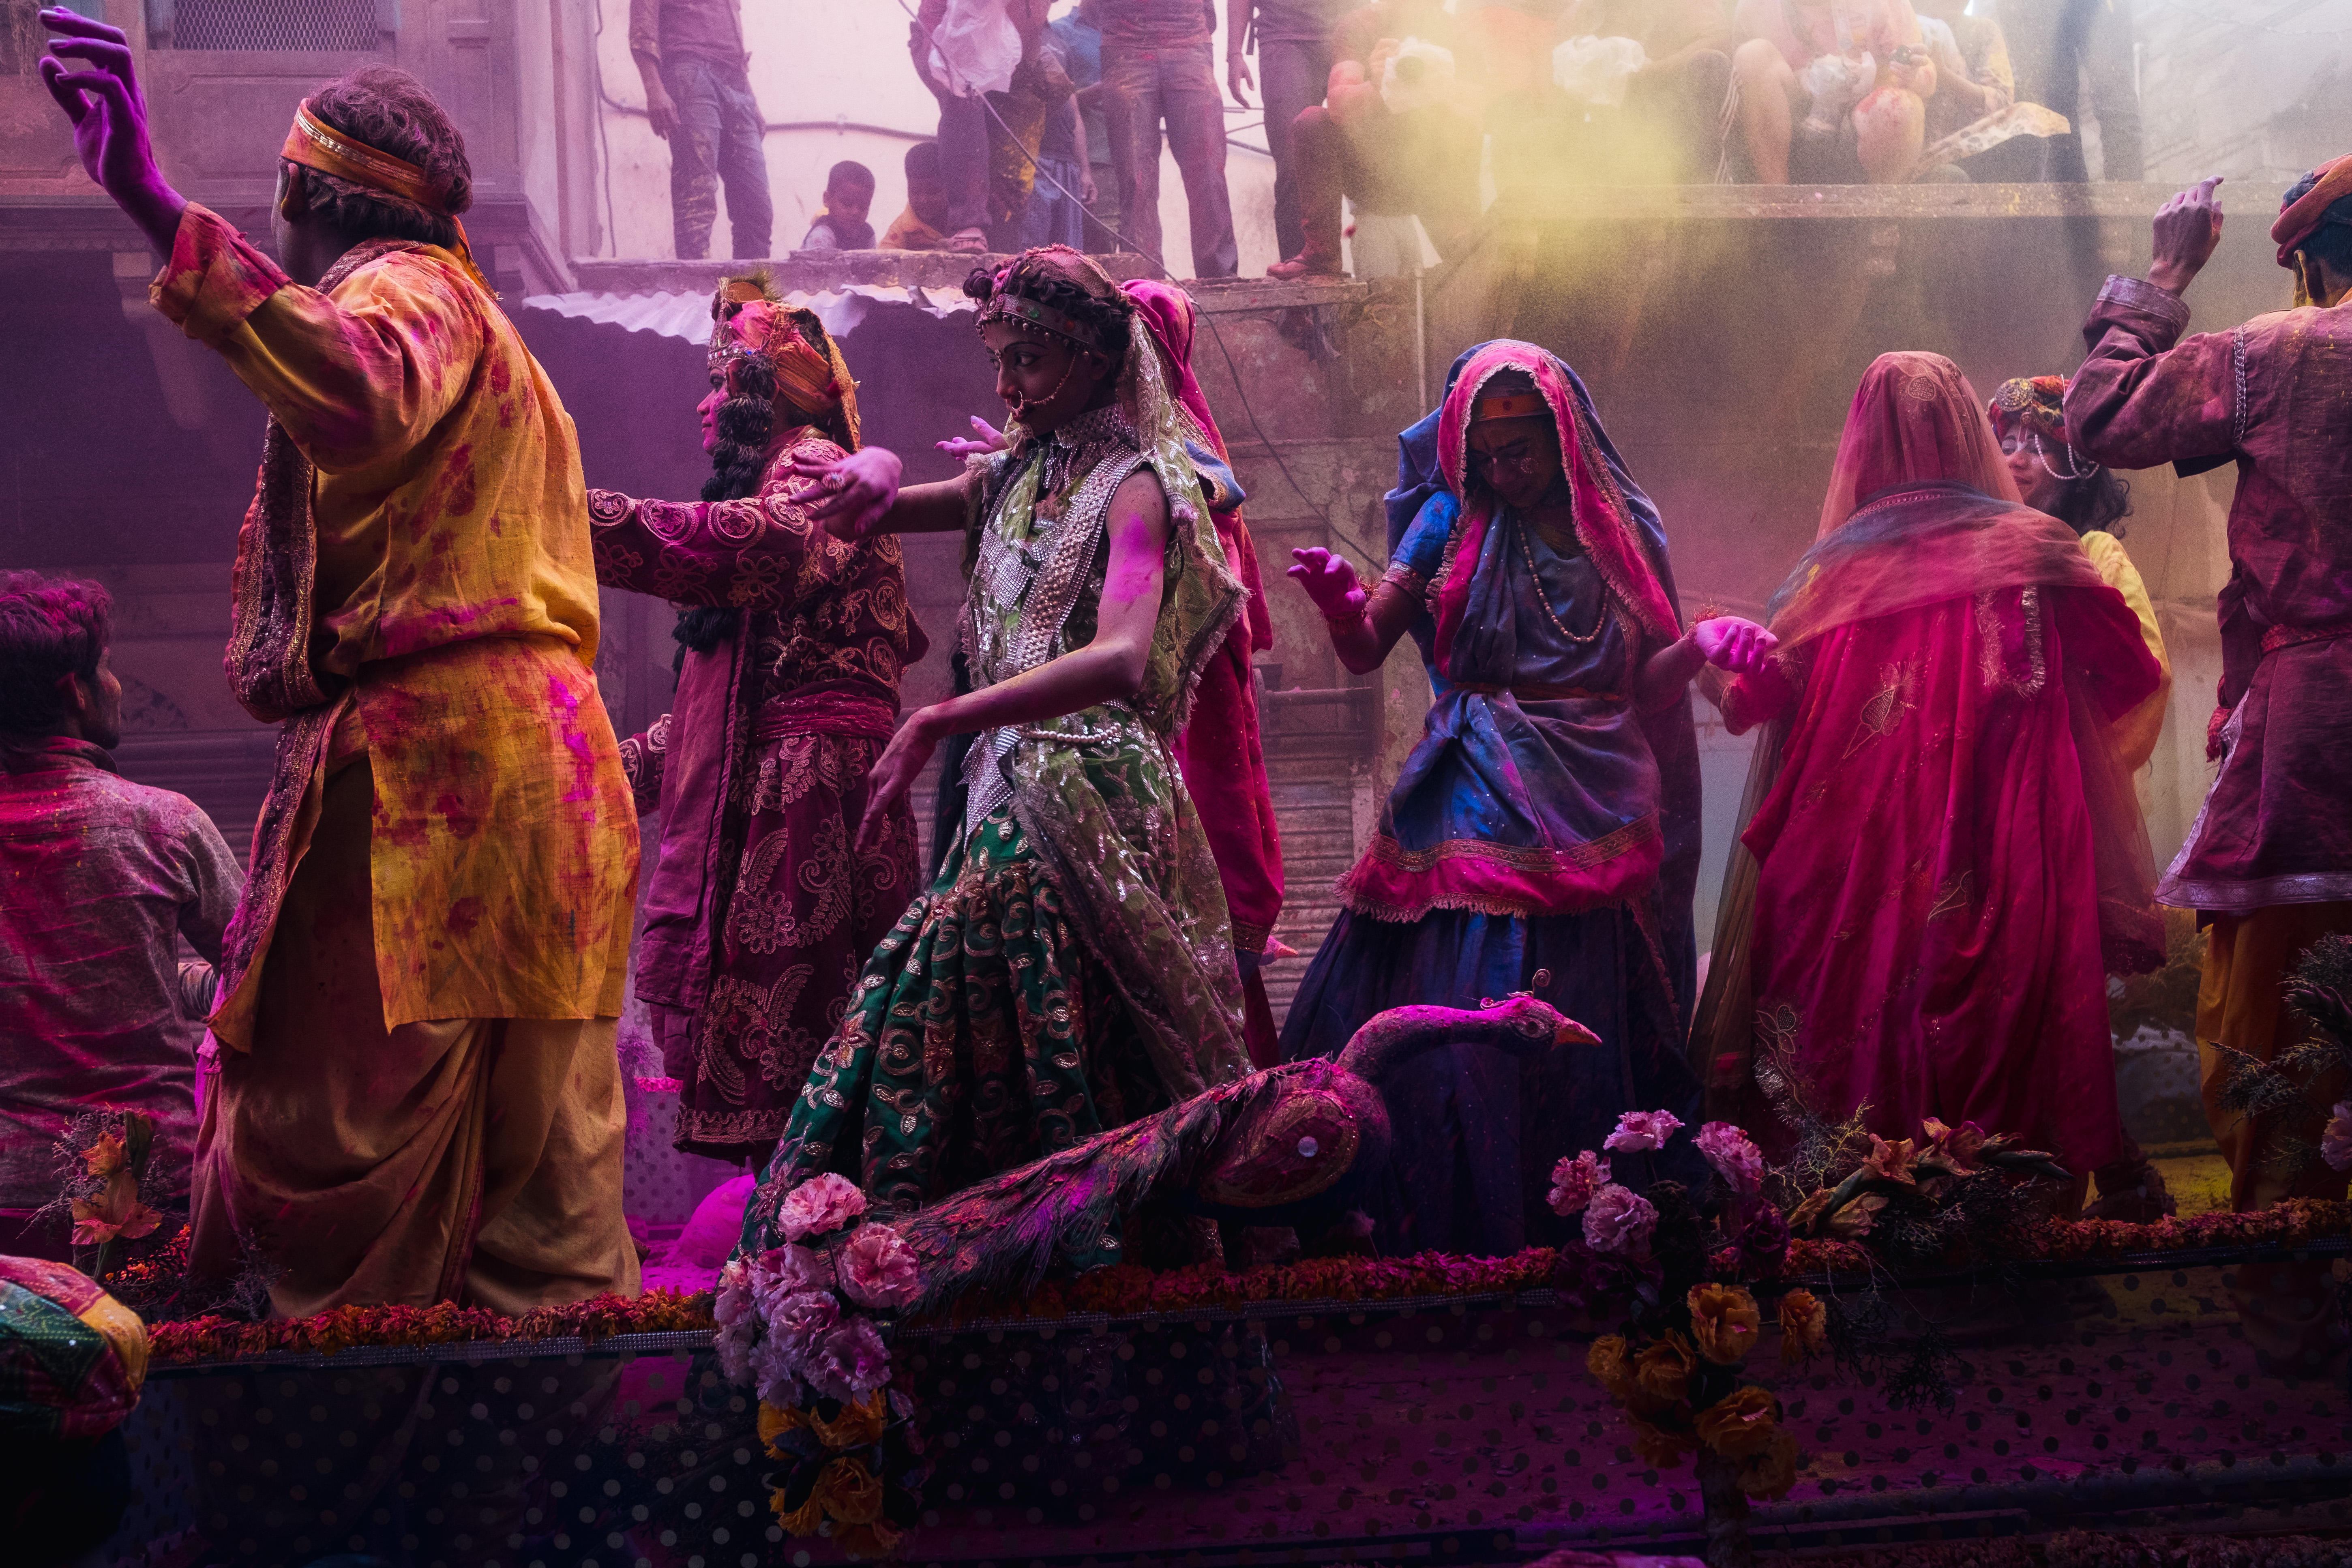 India Street Photography During Holi Festival. dancers on the float as colors are thrown. Images by Jason Vinson